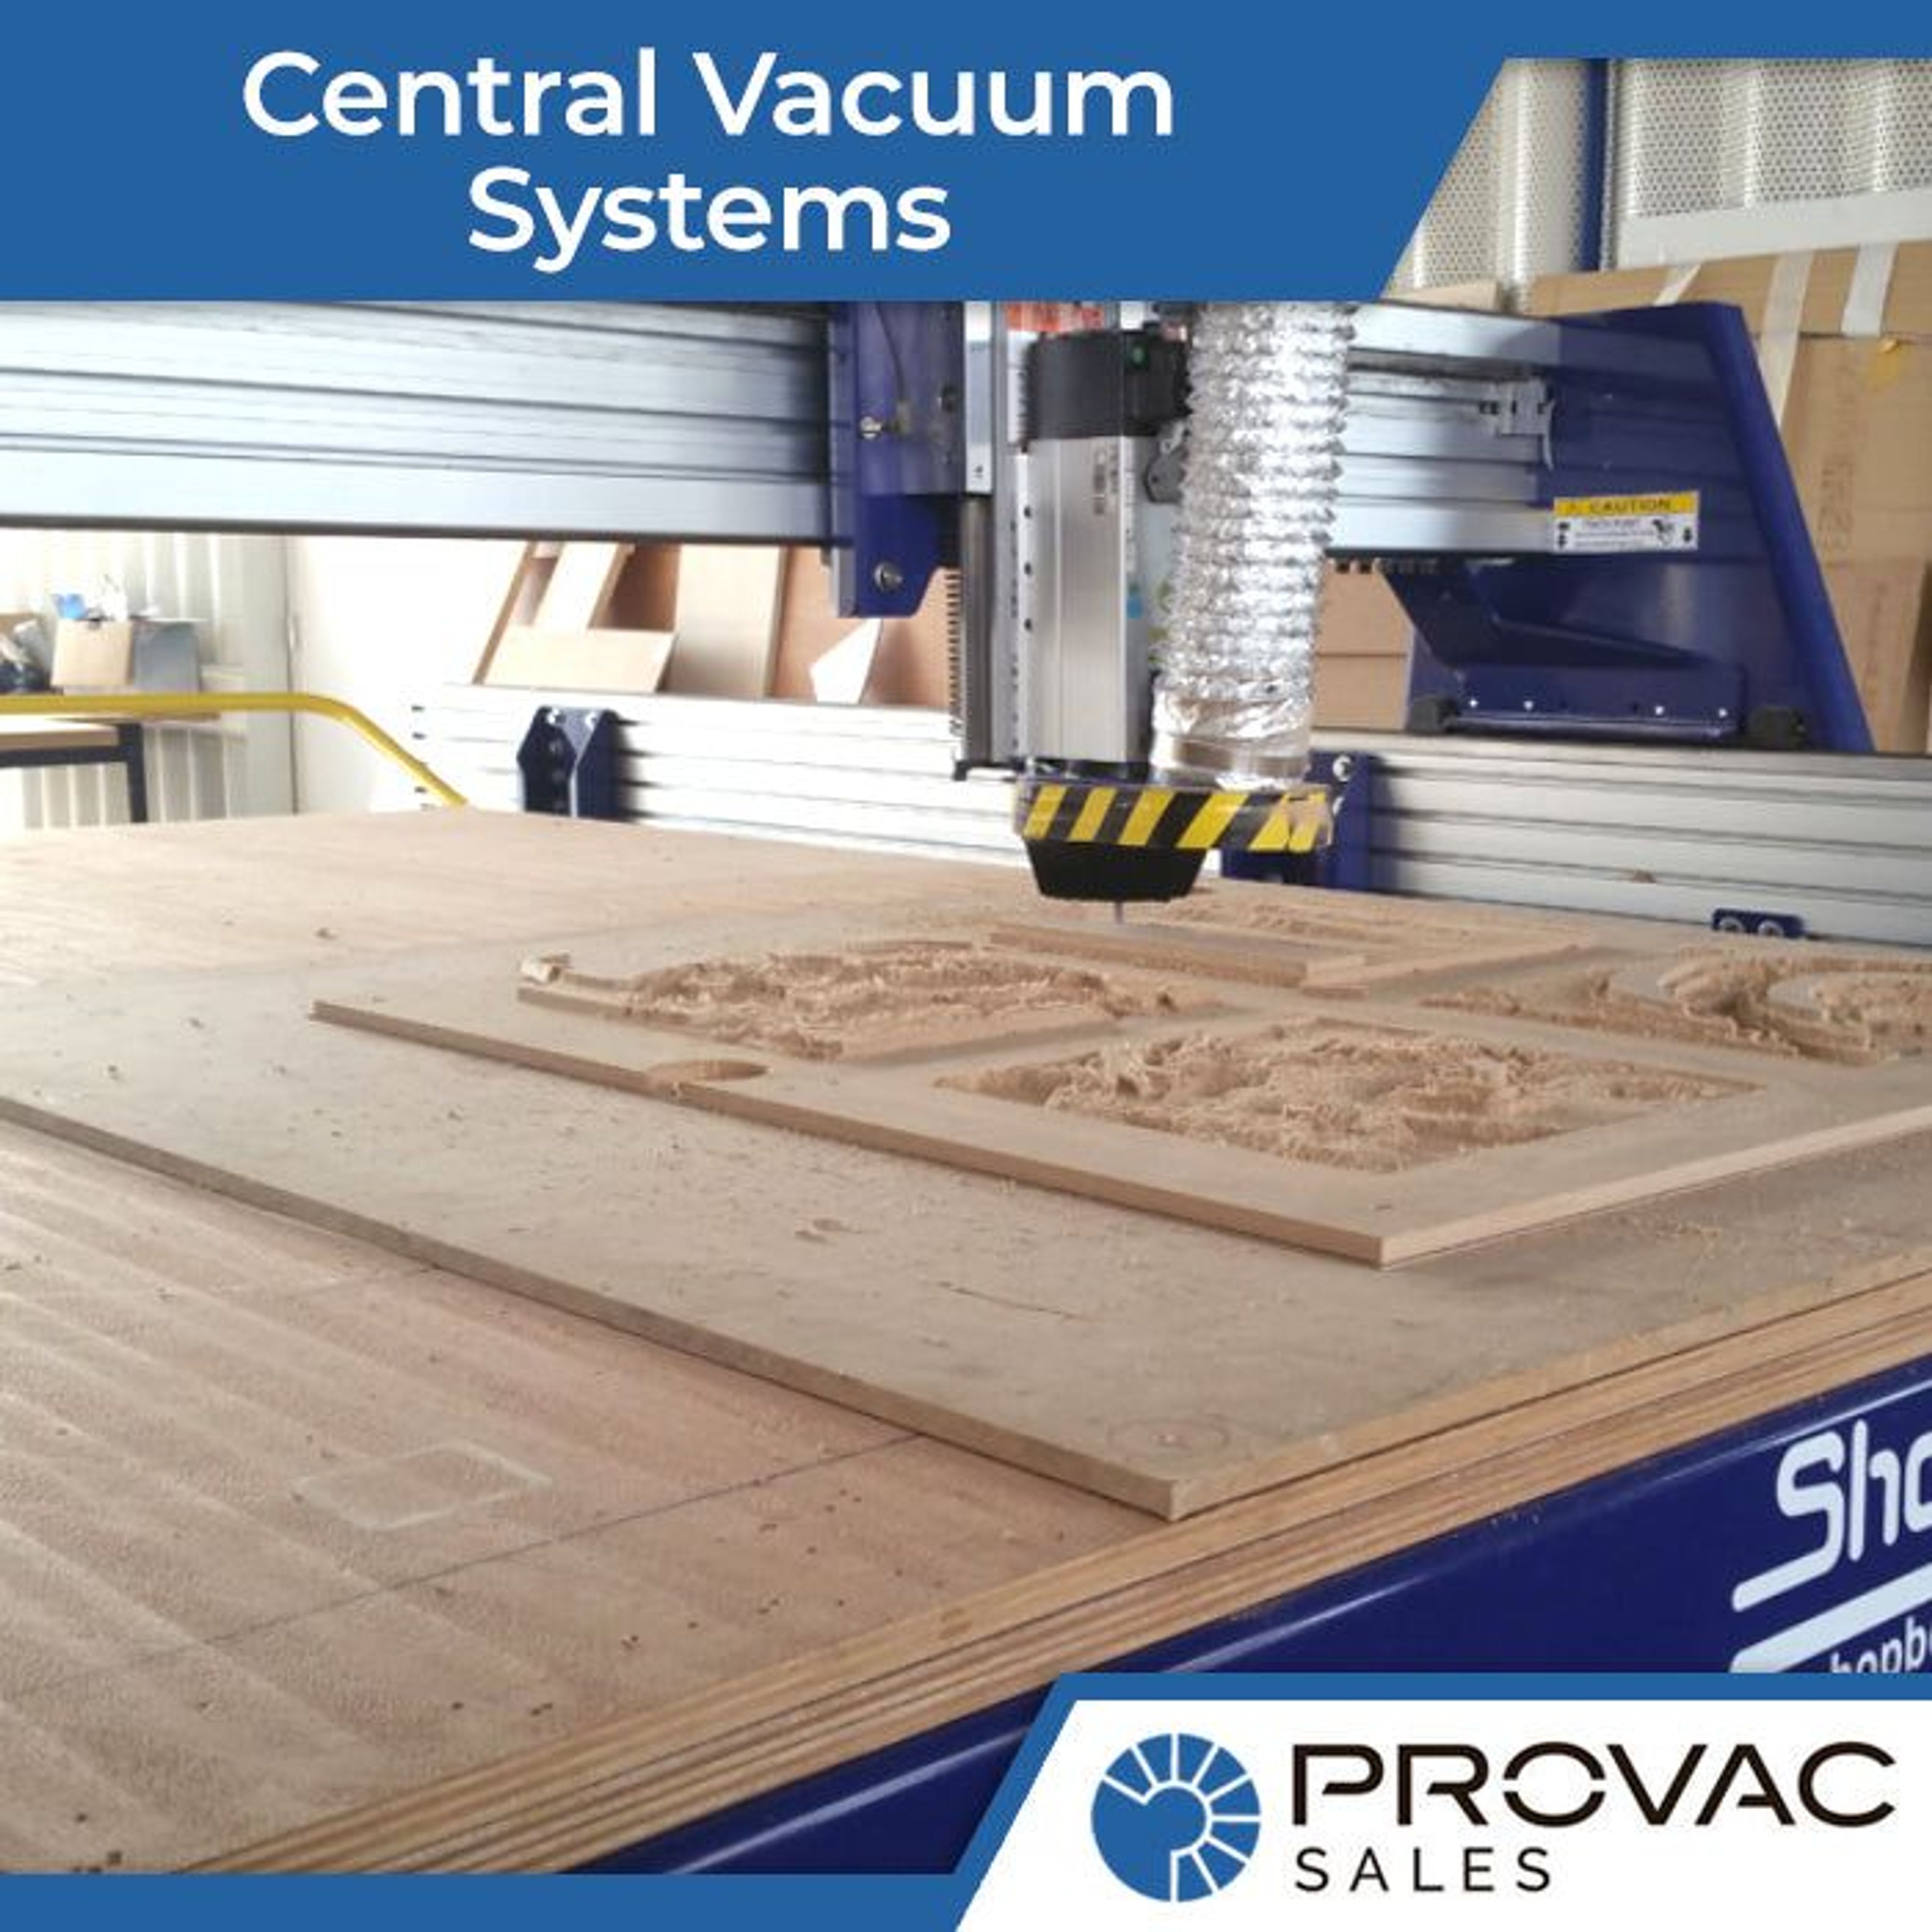 Central Vacuum Systems Background